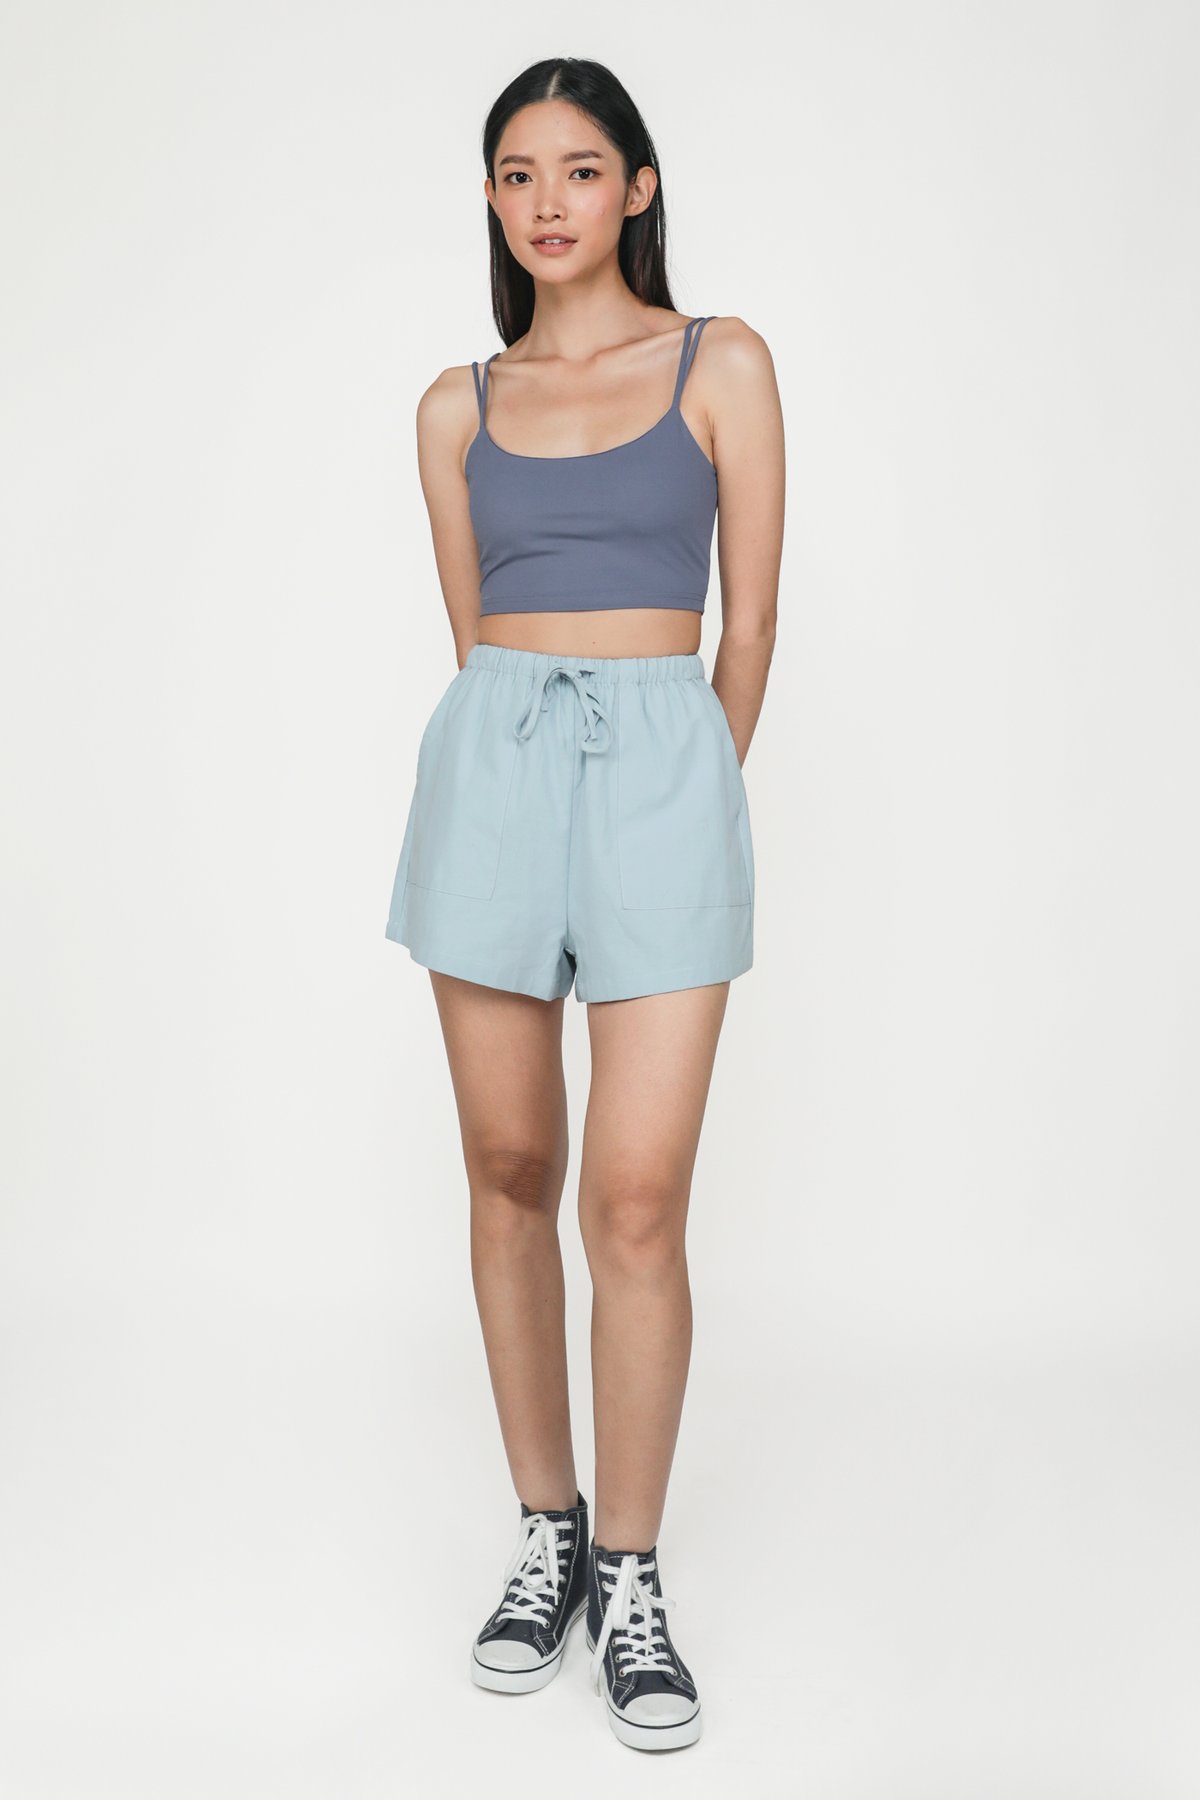 Constance Double Strap Padded Top (Dusty Blue)